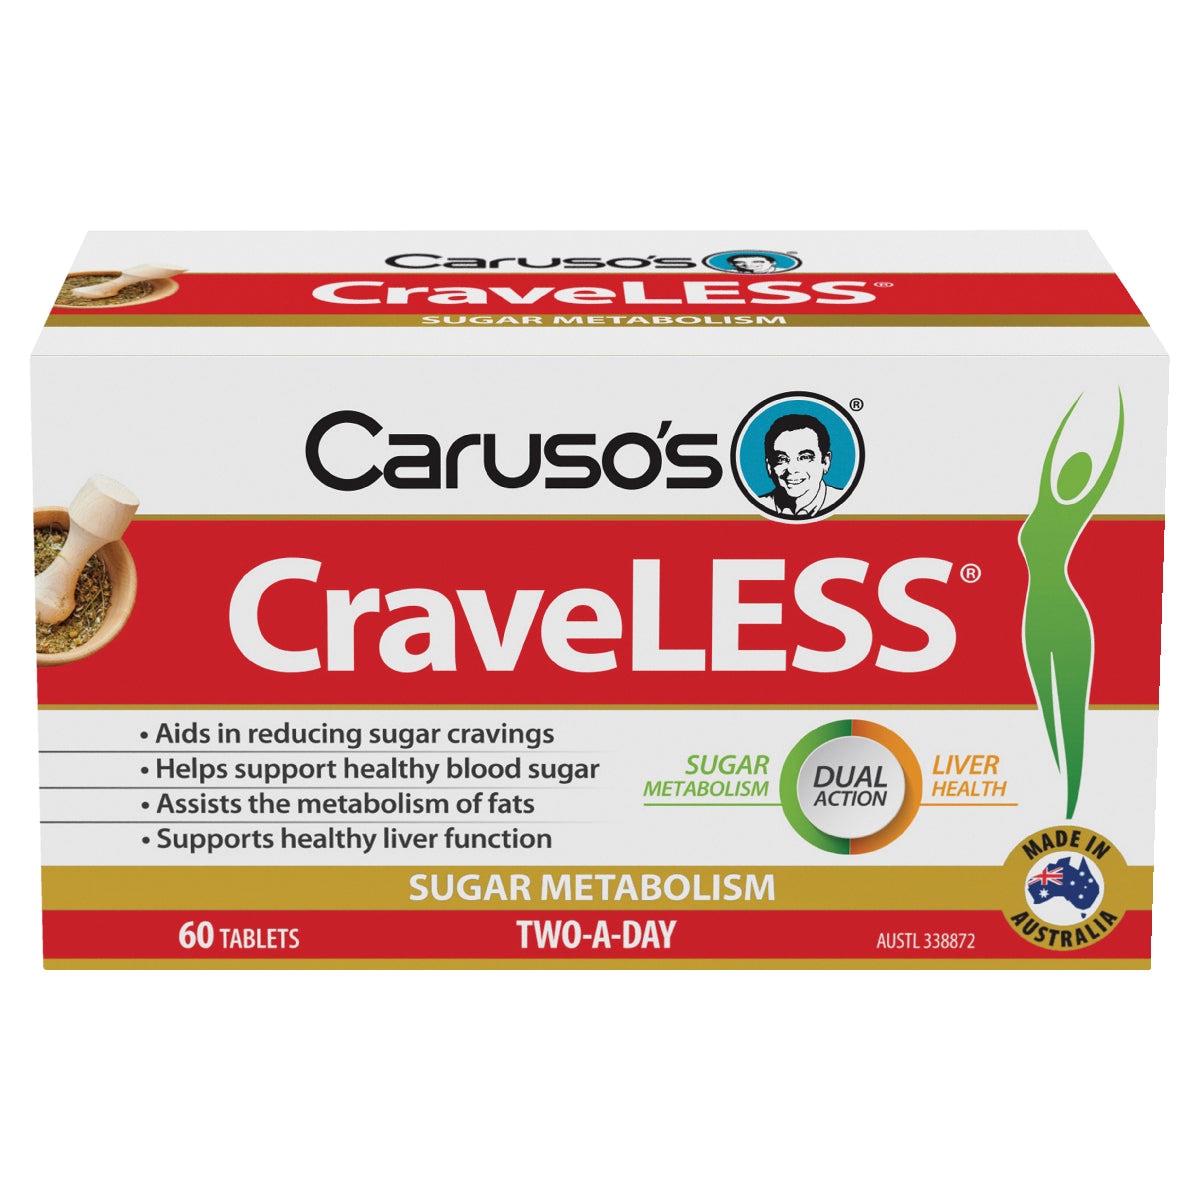 Carusos CraveLESS 60 Tablets